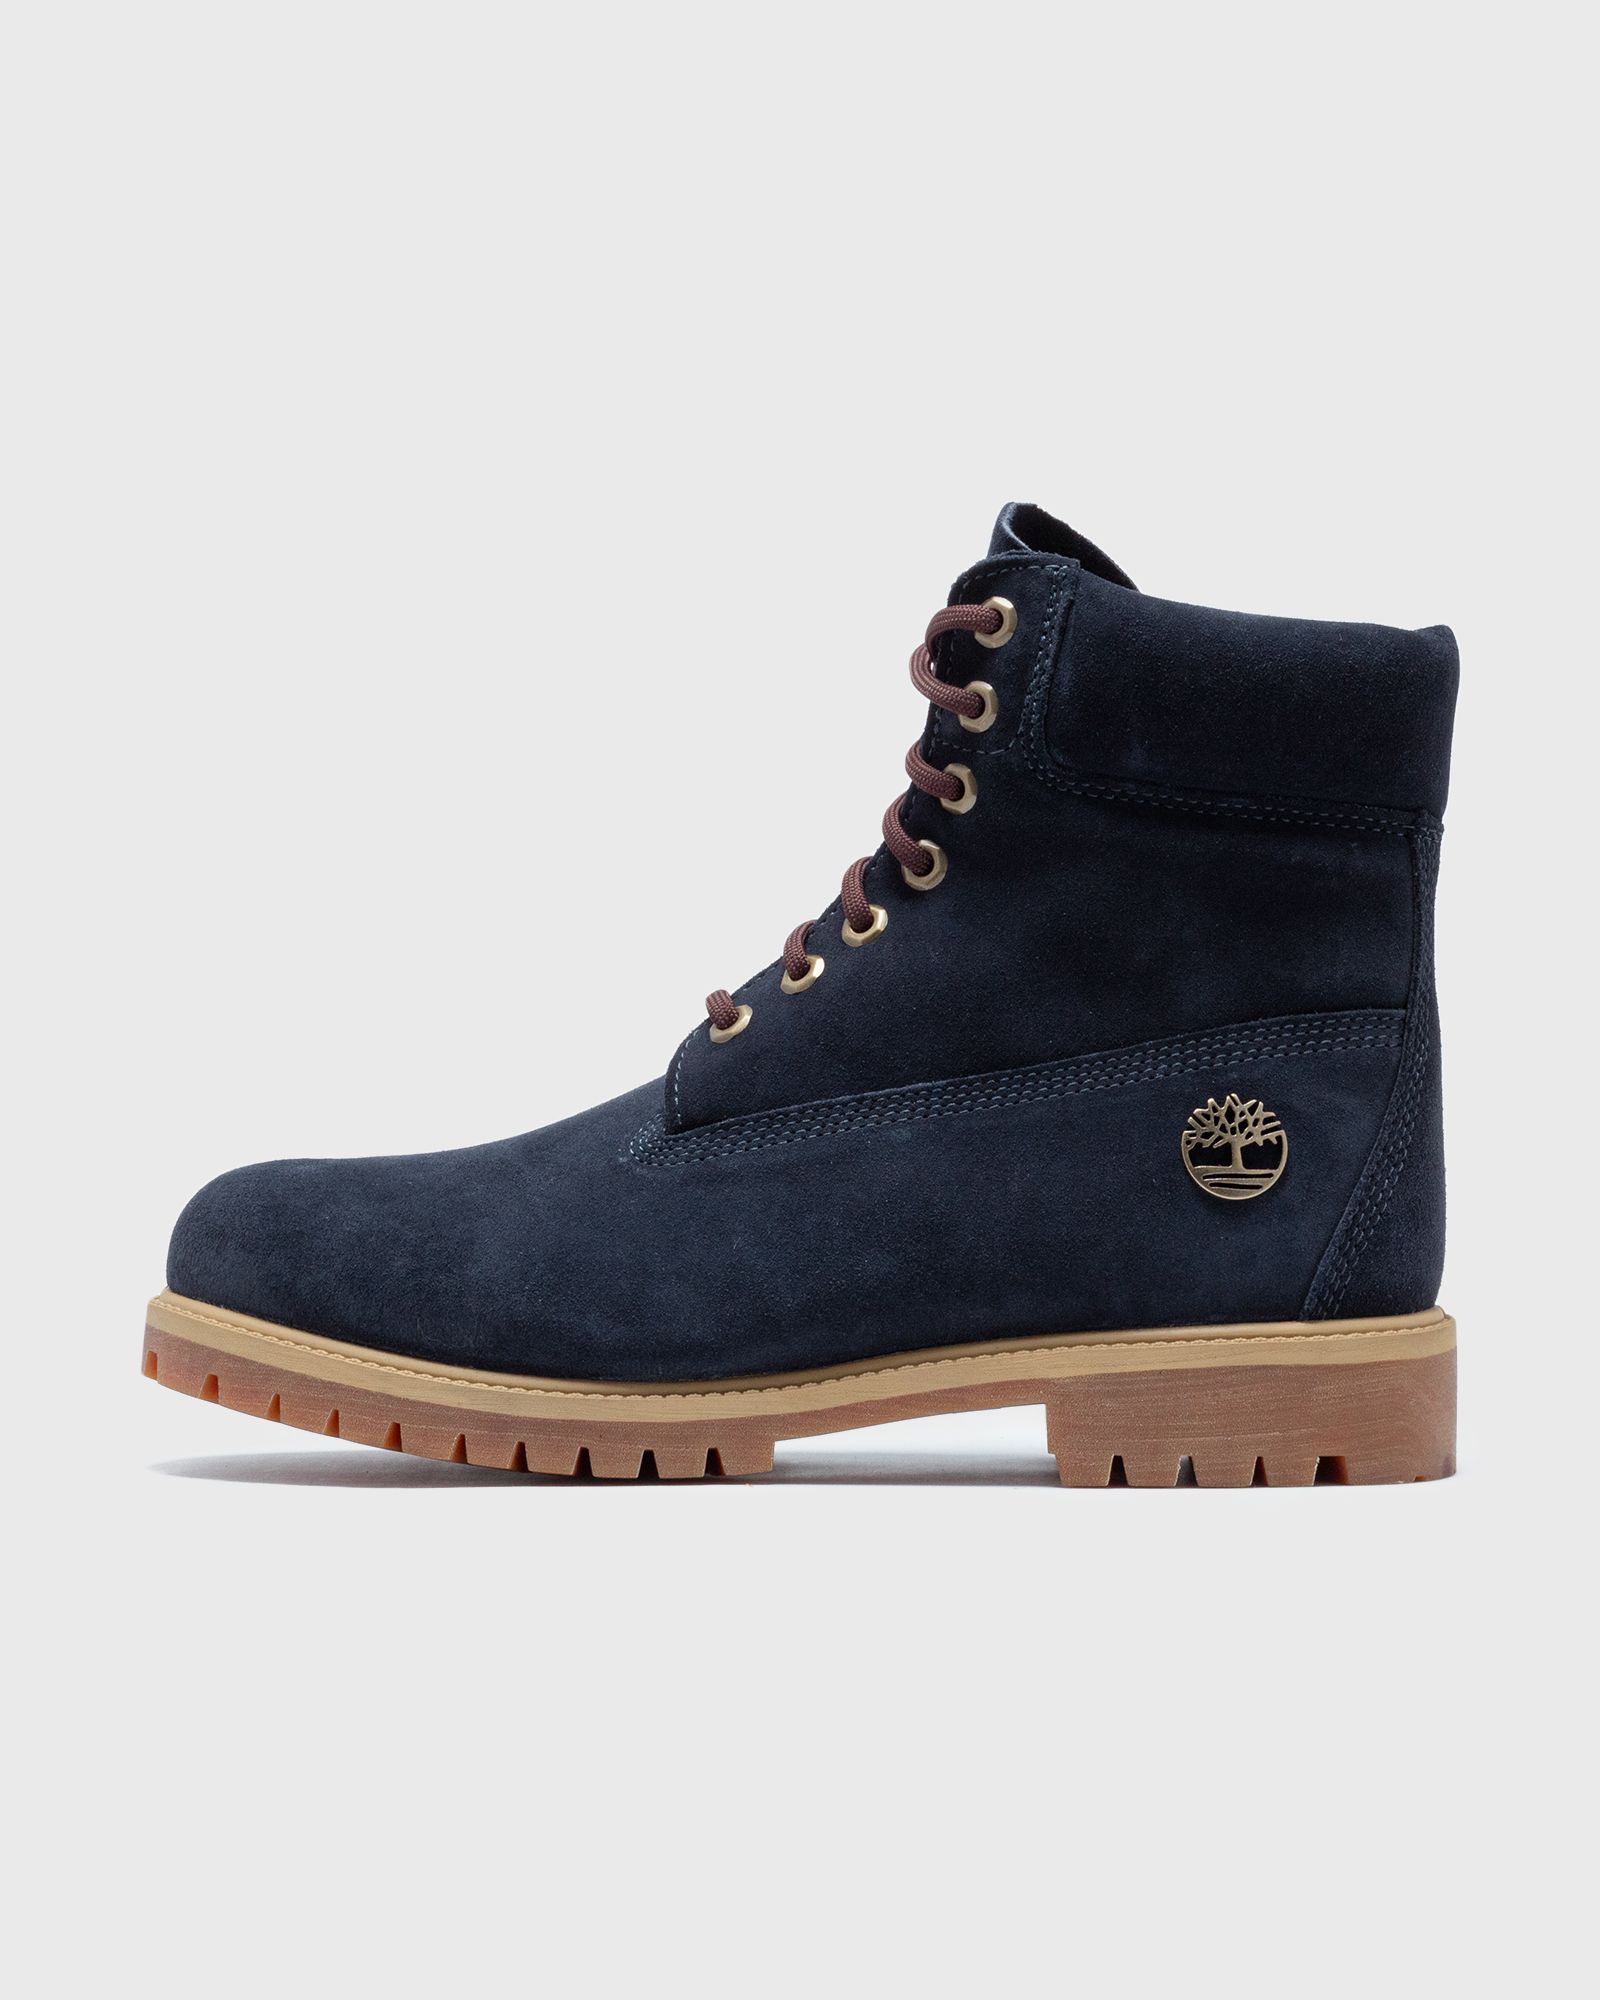 Timberland - heritage 6 inch lace up waterproof boot men boots blue in größe:41